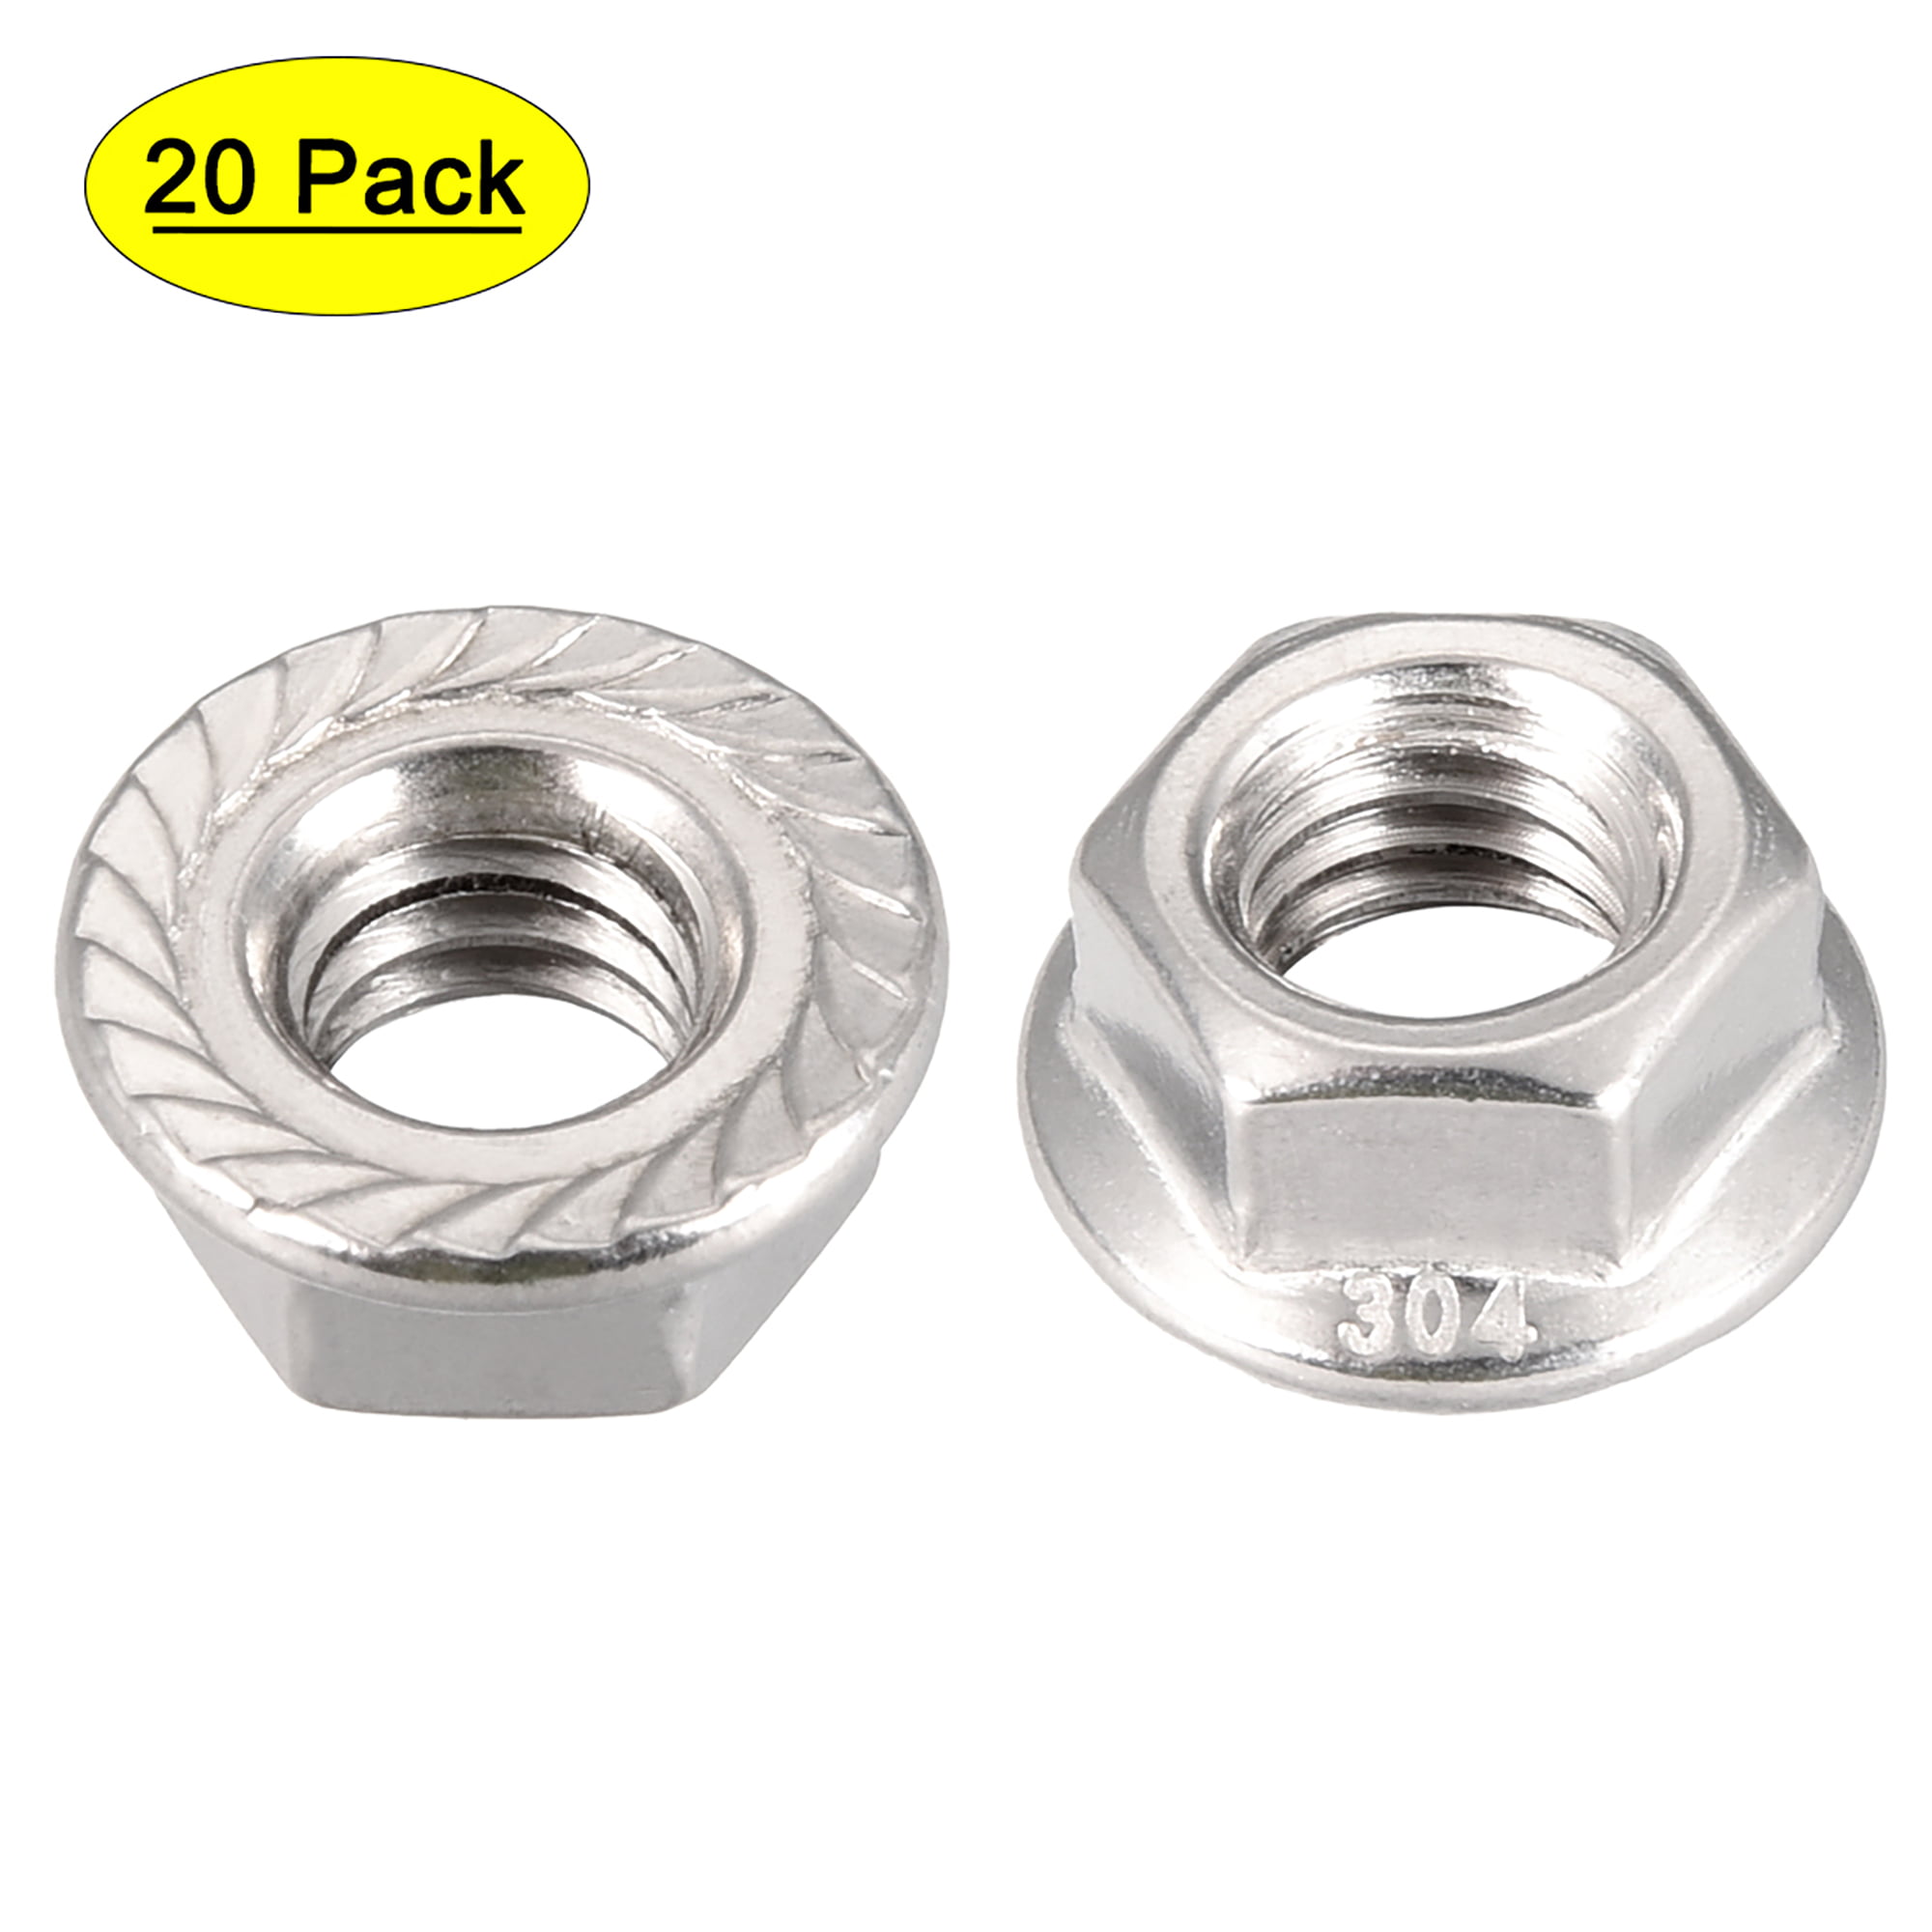 3/8-16 Stainless Steel Serrated Hex Flange Nuts Flange Locknuts 20 